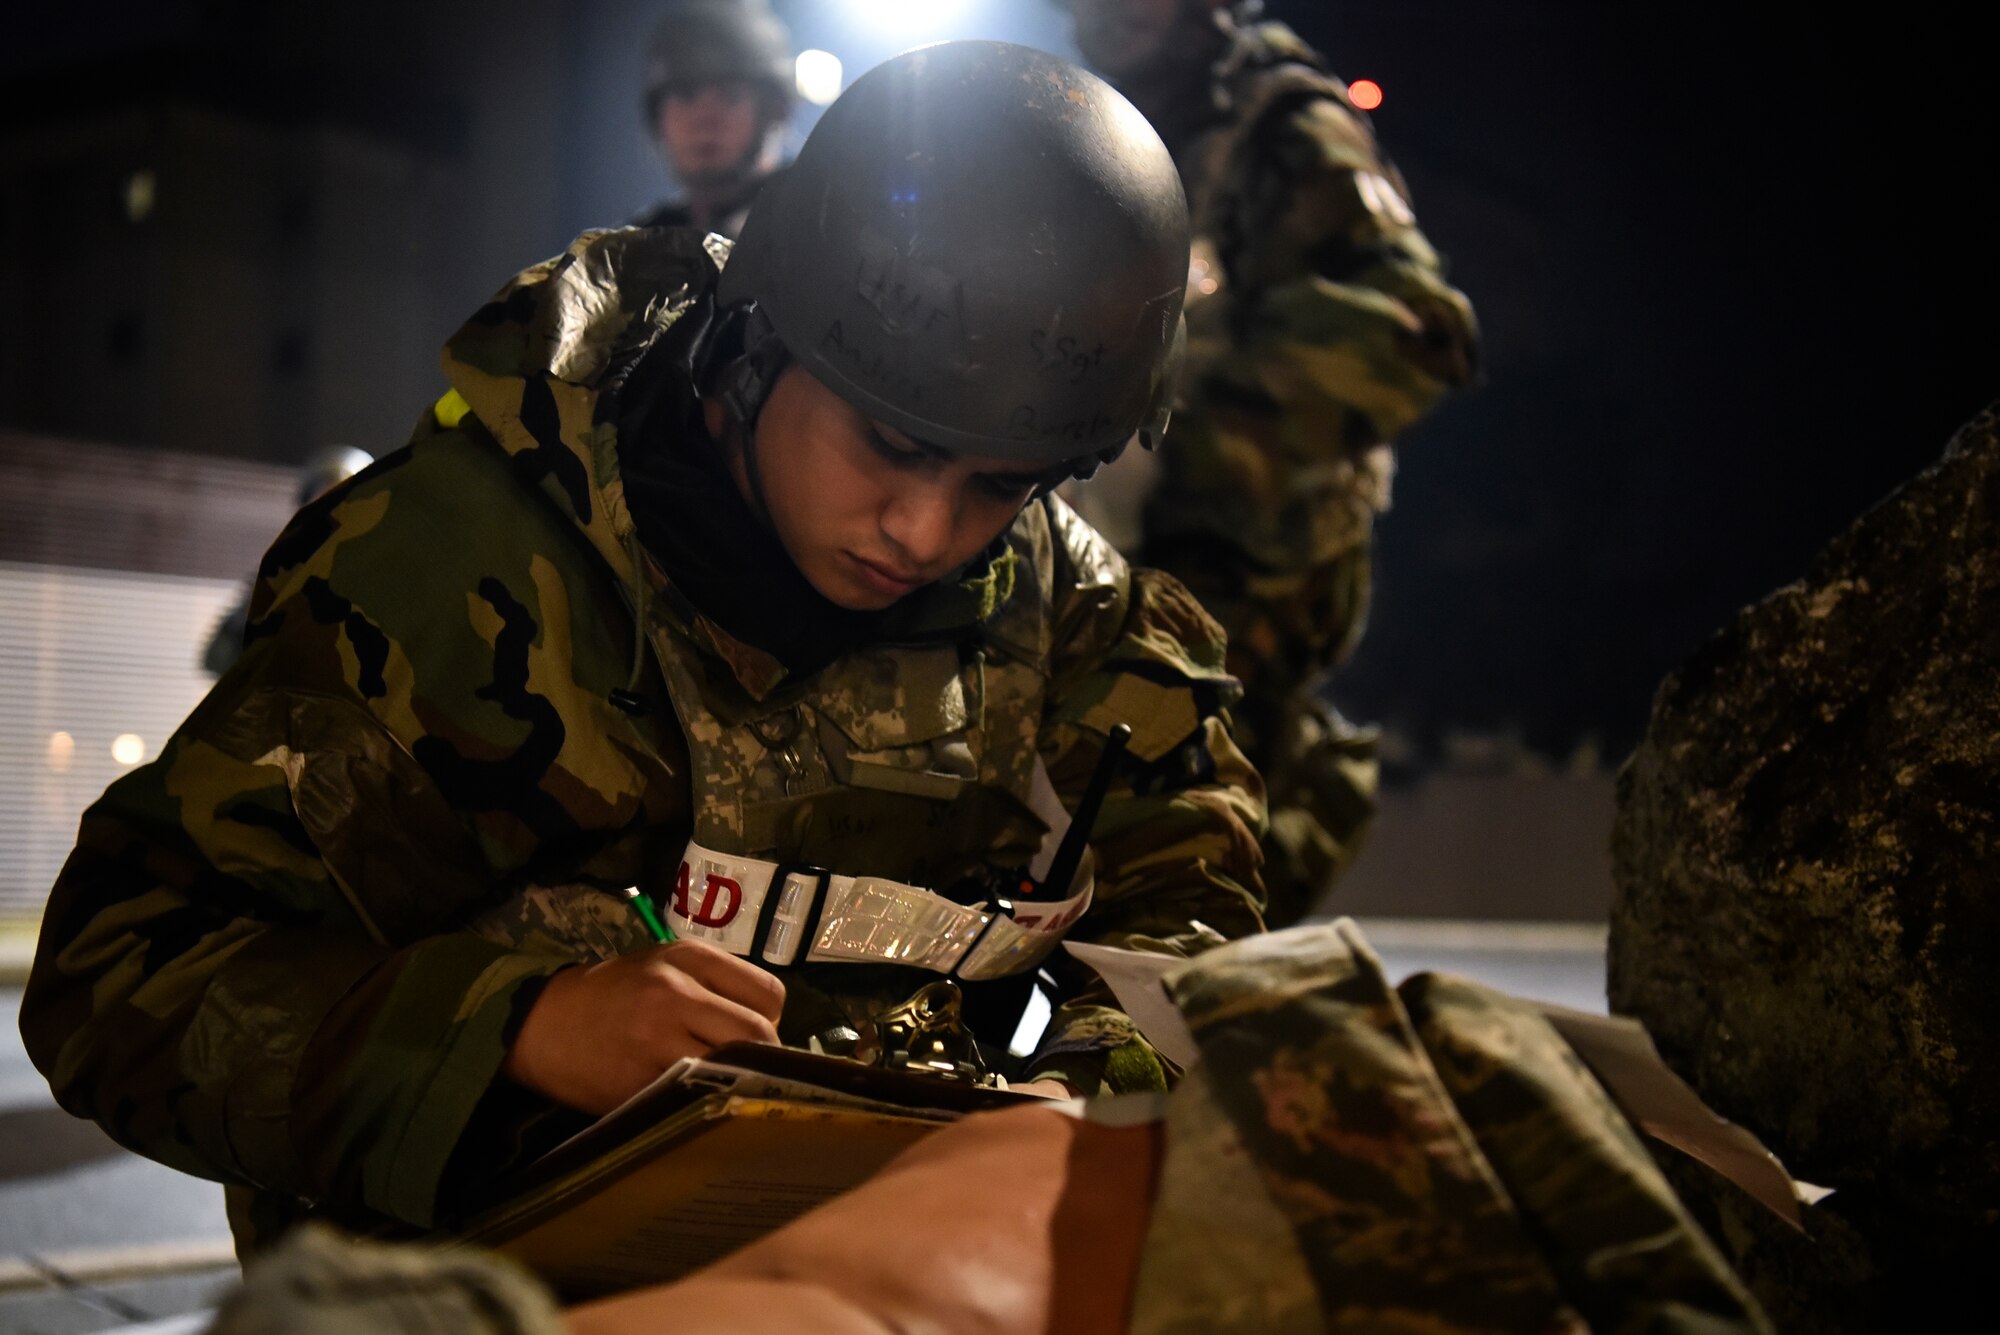 An Airmen assess a simulated victim during a training event.